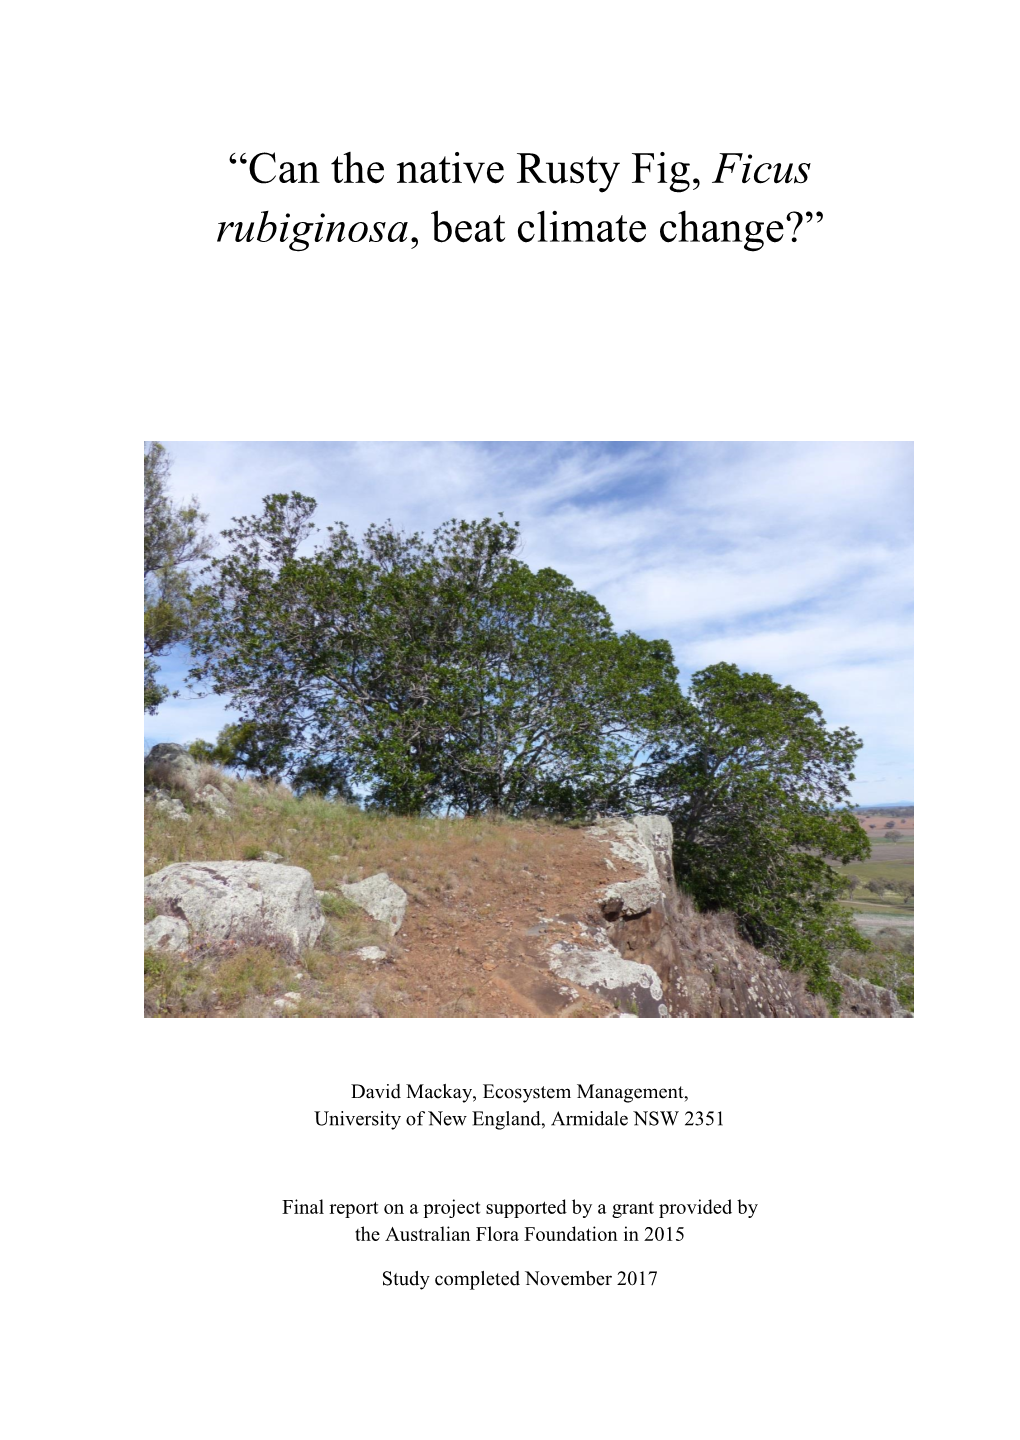 “Can the Native Rusty Fig, Ficus Rubiginosa, Beat Climate Change?”